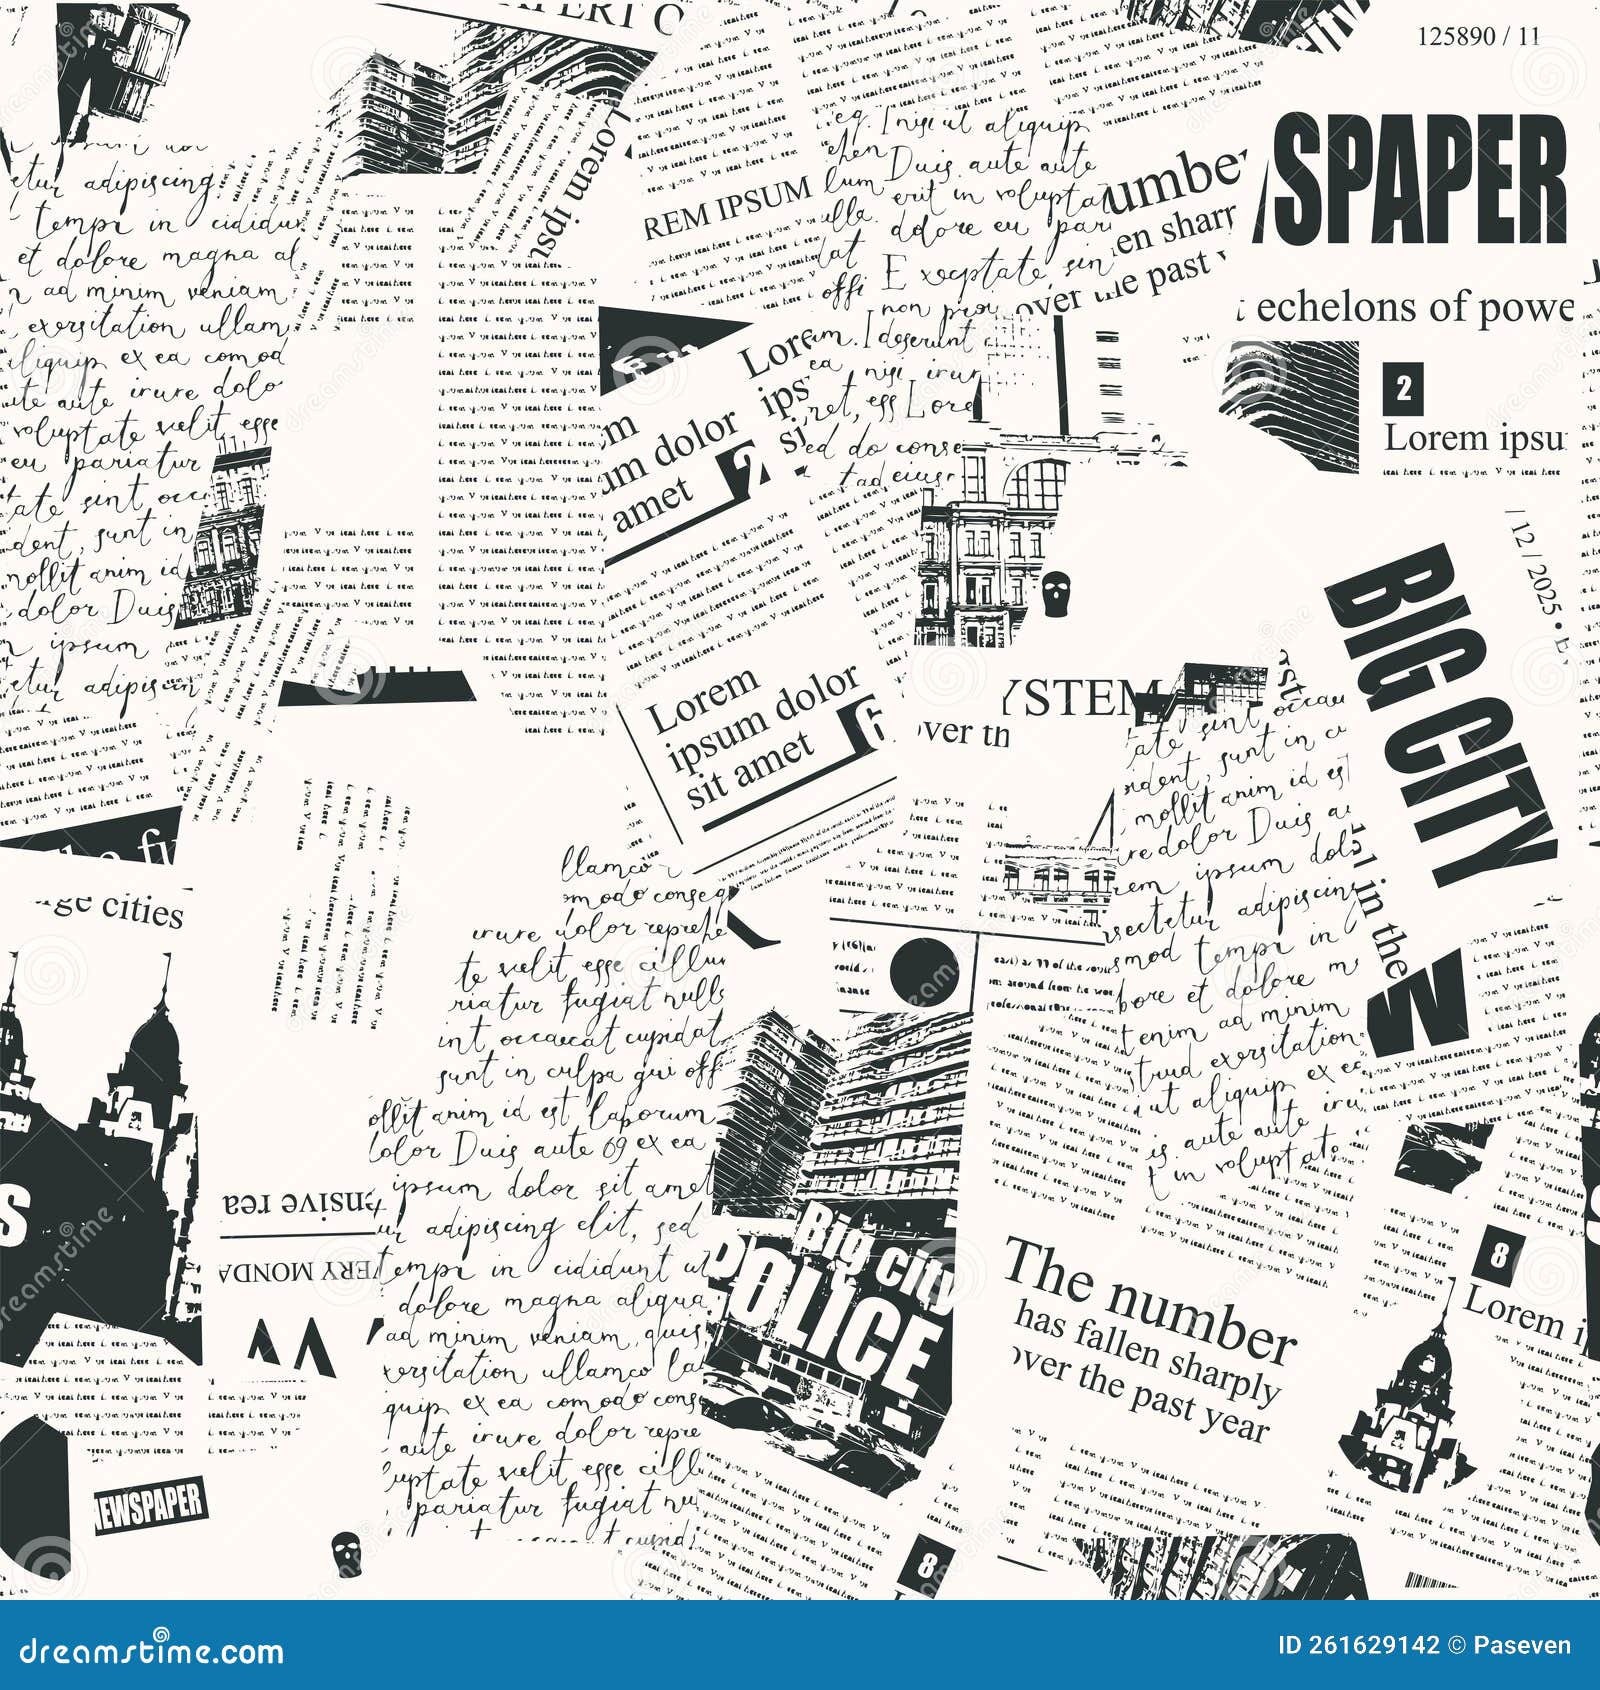 Newspaper Collage Fabric, Wallpaper and Home Decor